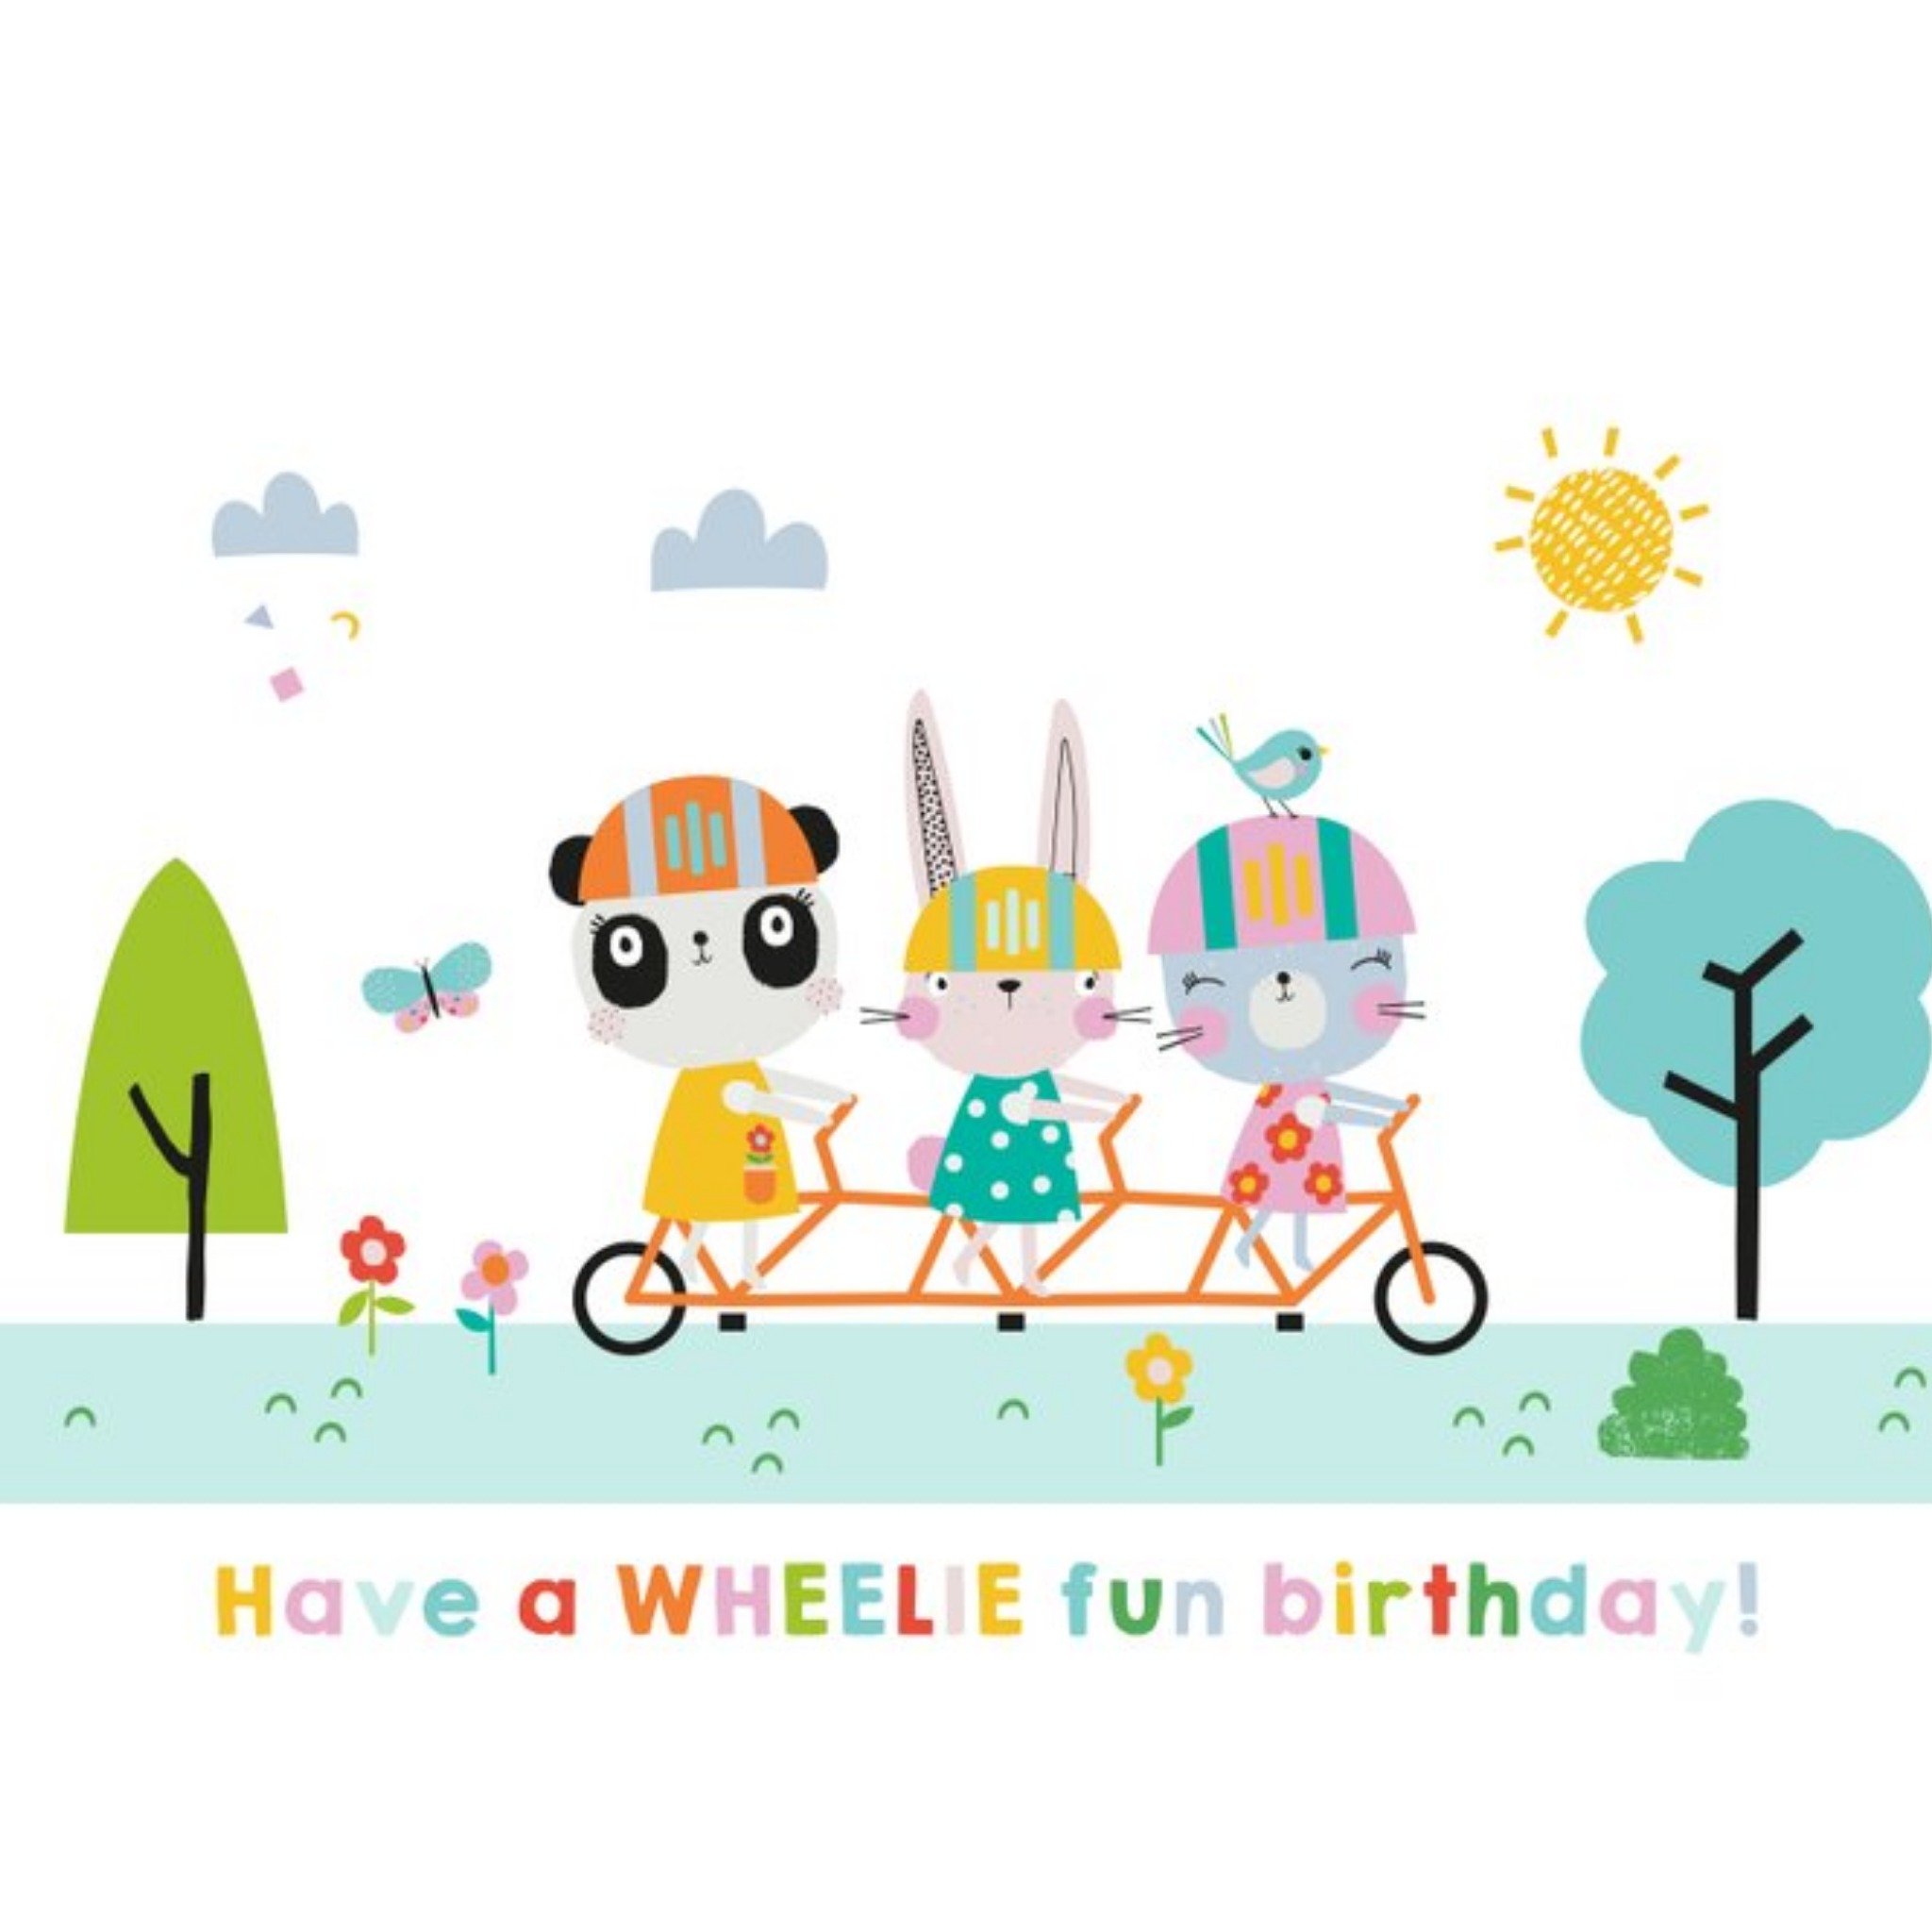 Moonpig Cute Illustrated Characters Have A Wheelie Fun Birthday Card, Square